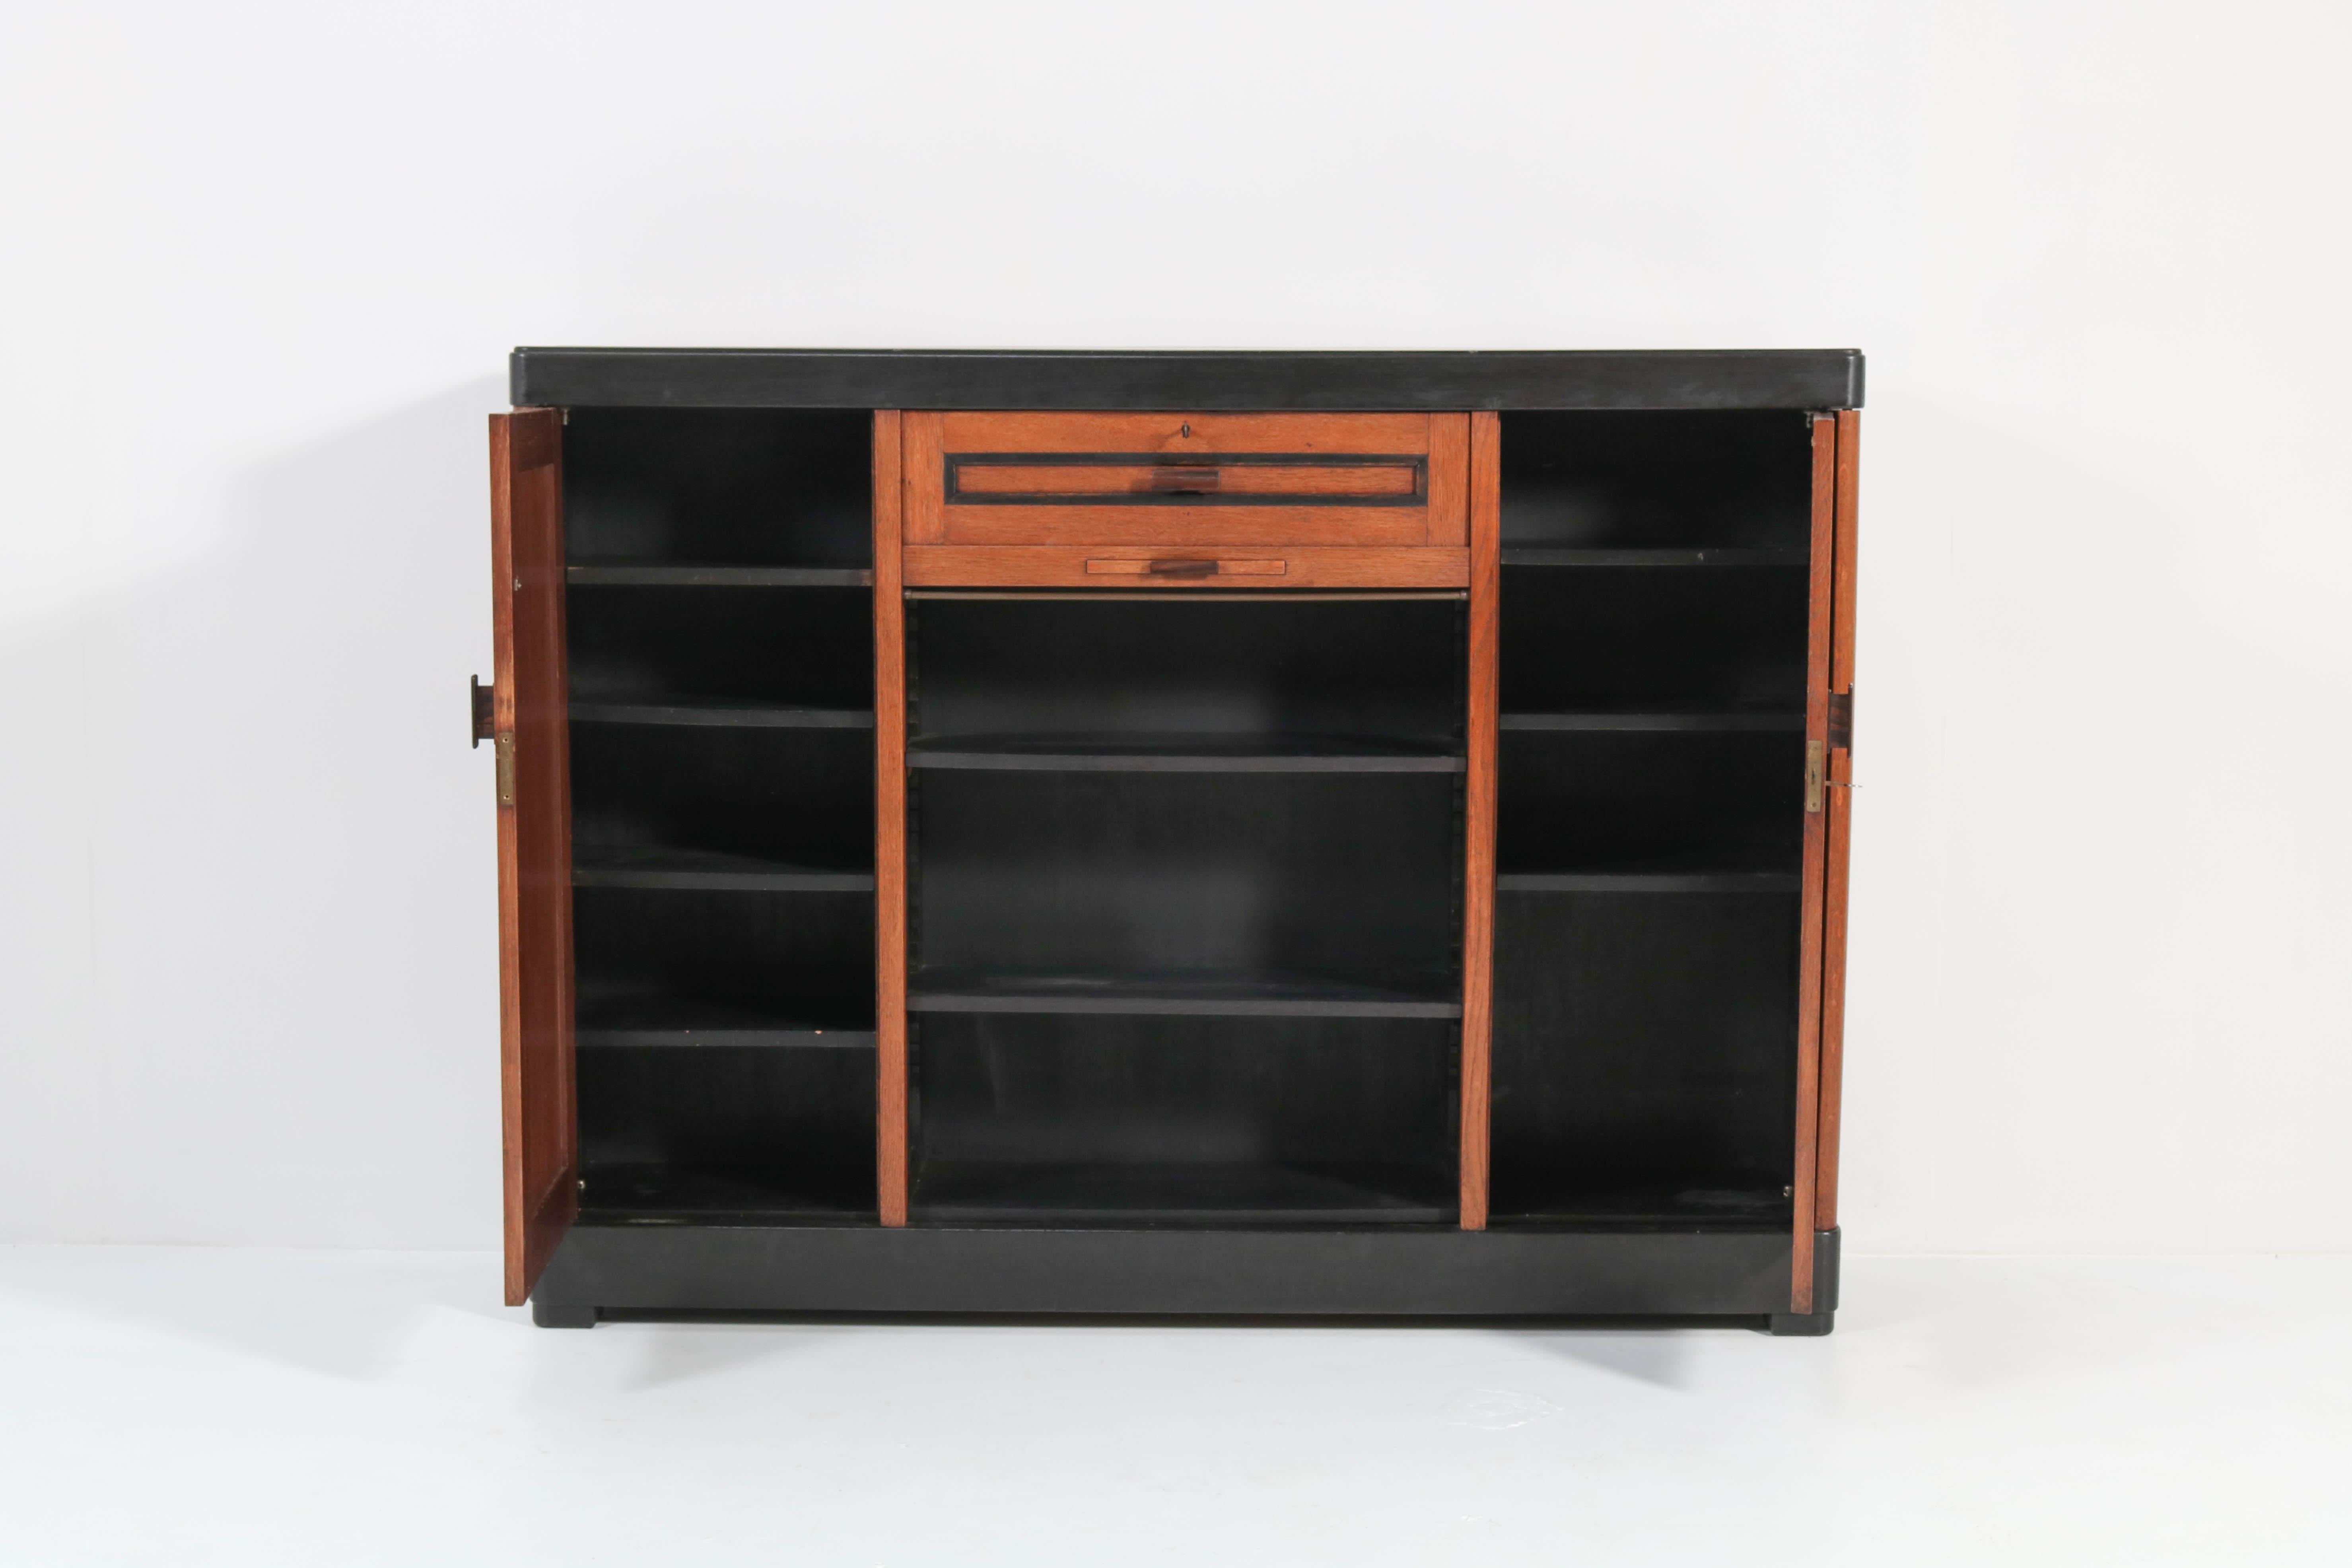 Early 20th Century Oak Art Deco Haagse School Bookcase by Frits Spanjaard for L.O.V. Oosterbeek